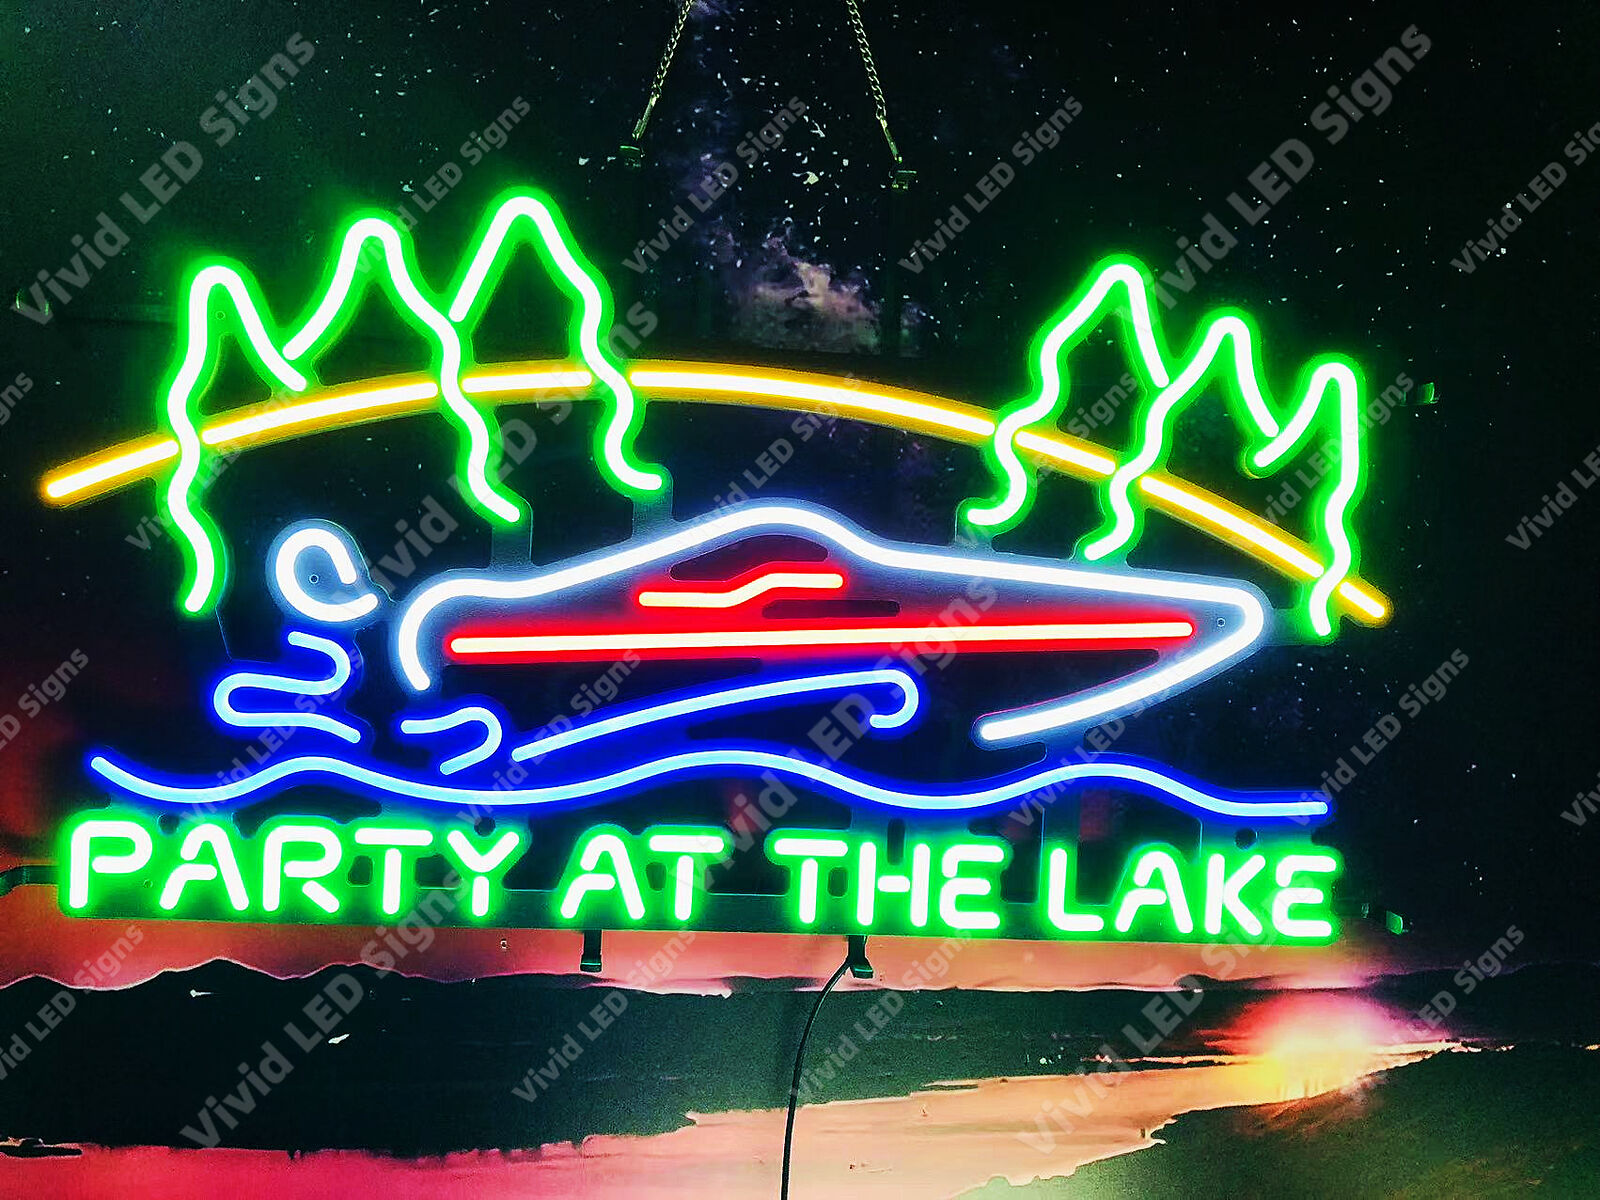 Party At The Lake Speedboat Boat Vivid LED Neon Lamp Sign Light With Dimmer